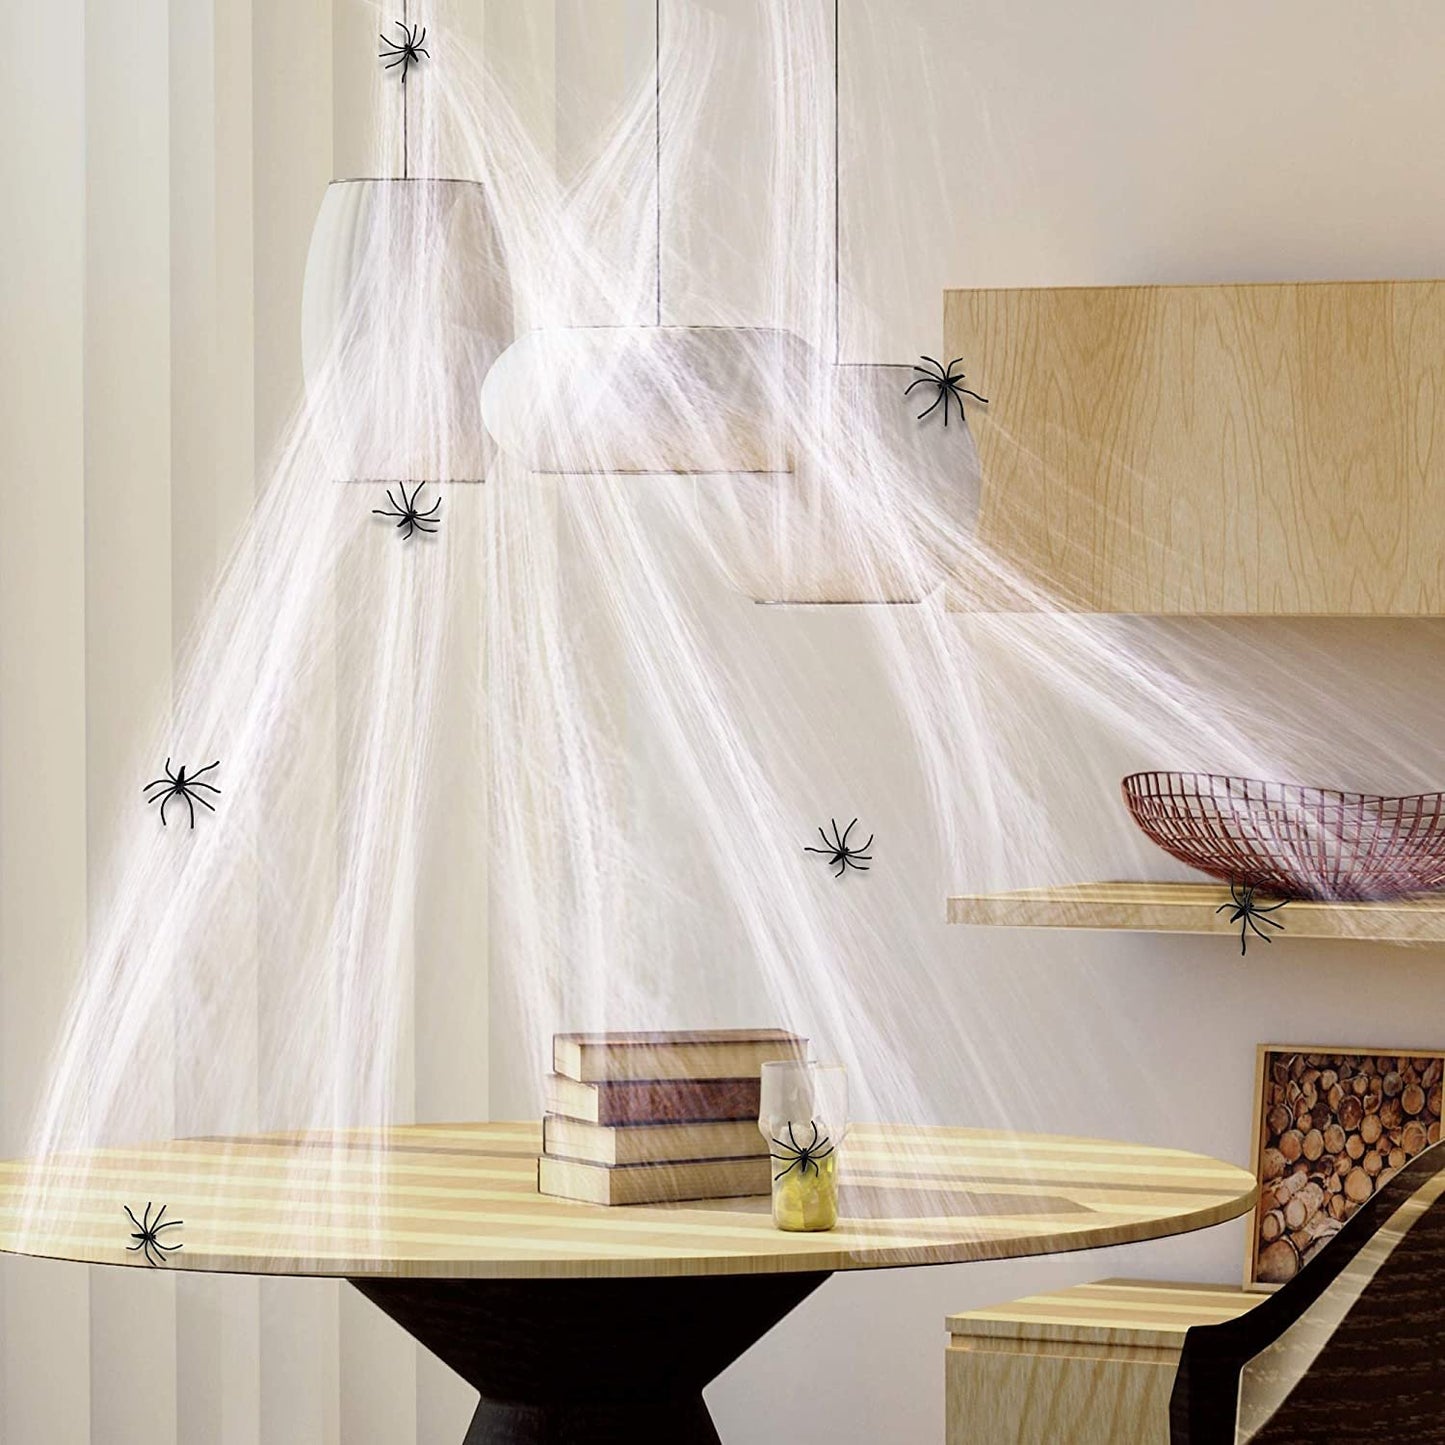 ArtCreativity Spider Web Halloween Decorations - Set of 12 - Super Stretchy Cobwebs with Plastic Spider - Indoor and Outdoor Scary Spider webs Decor - For Home, Office, Party, Kids' Prizes and More